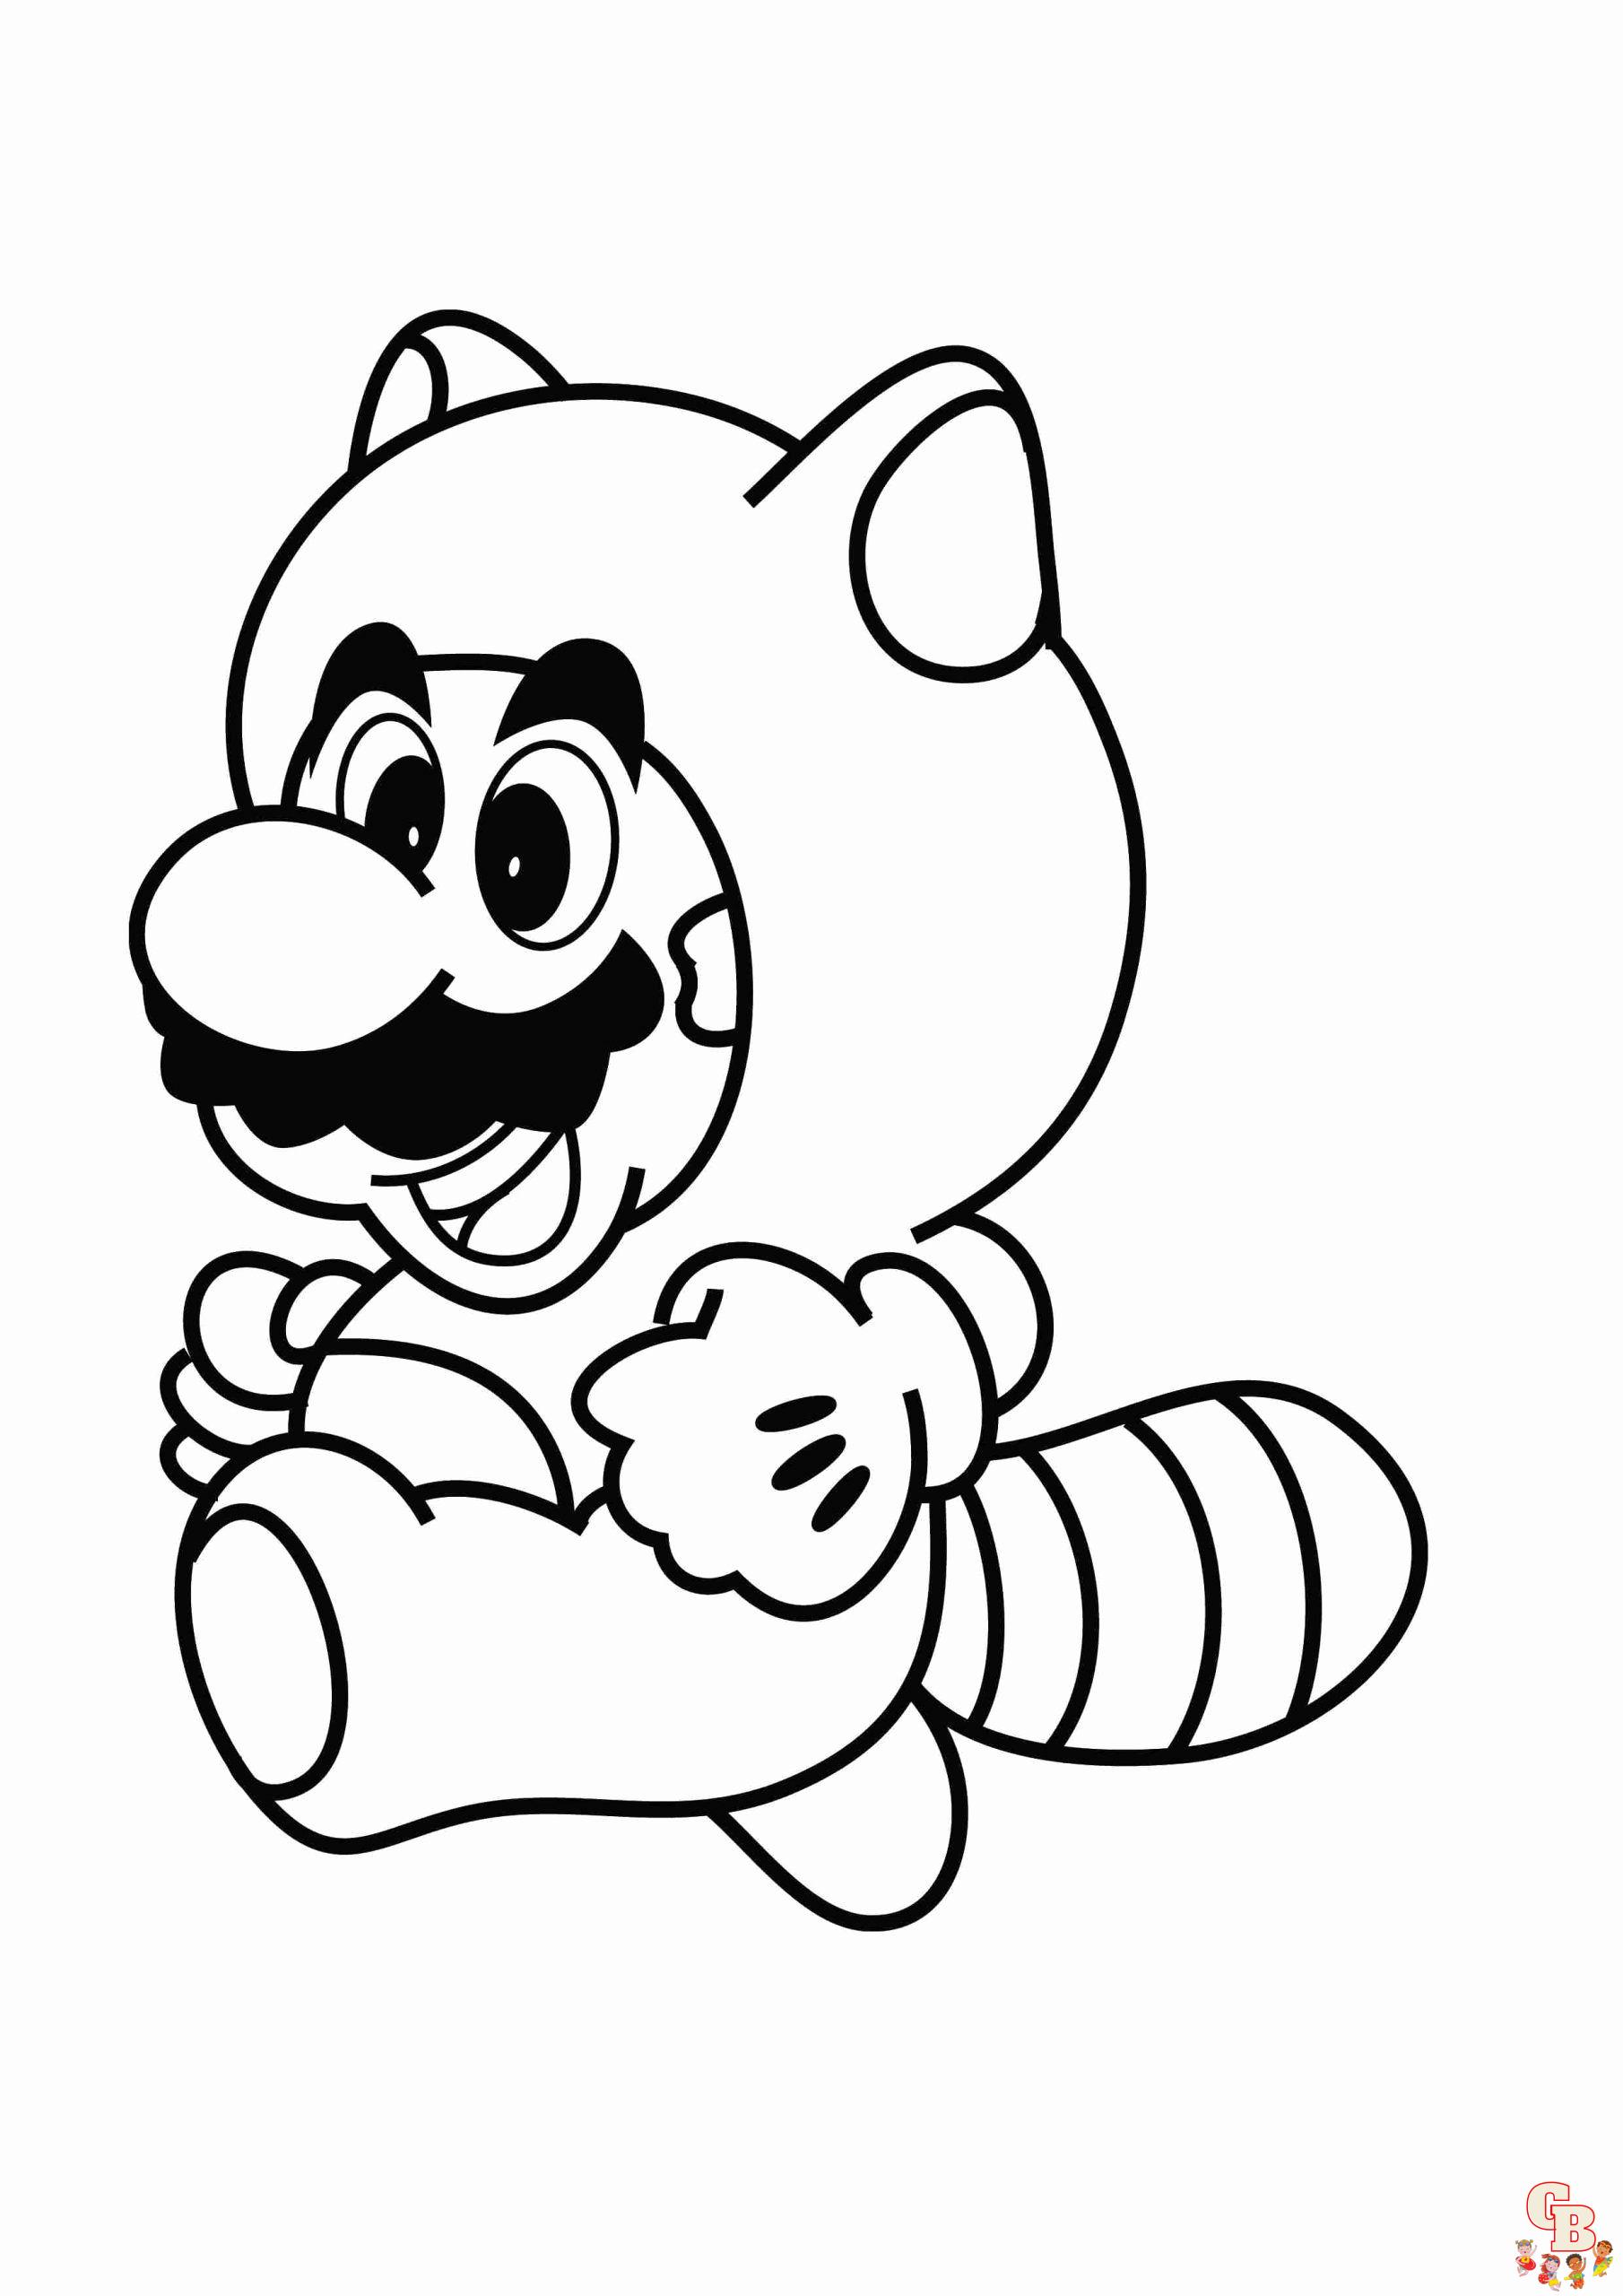 Explore a world of fun with nintendo coloring pages